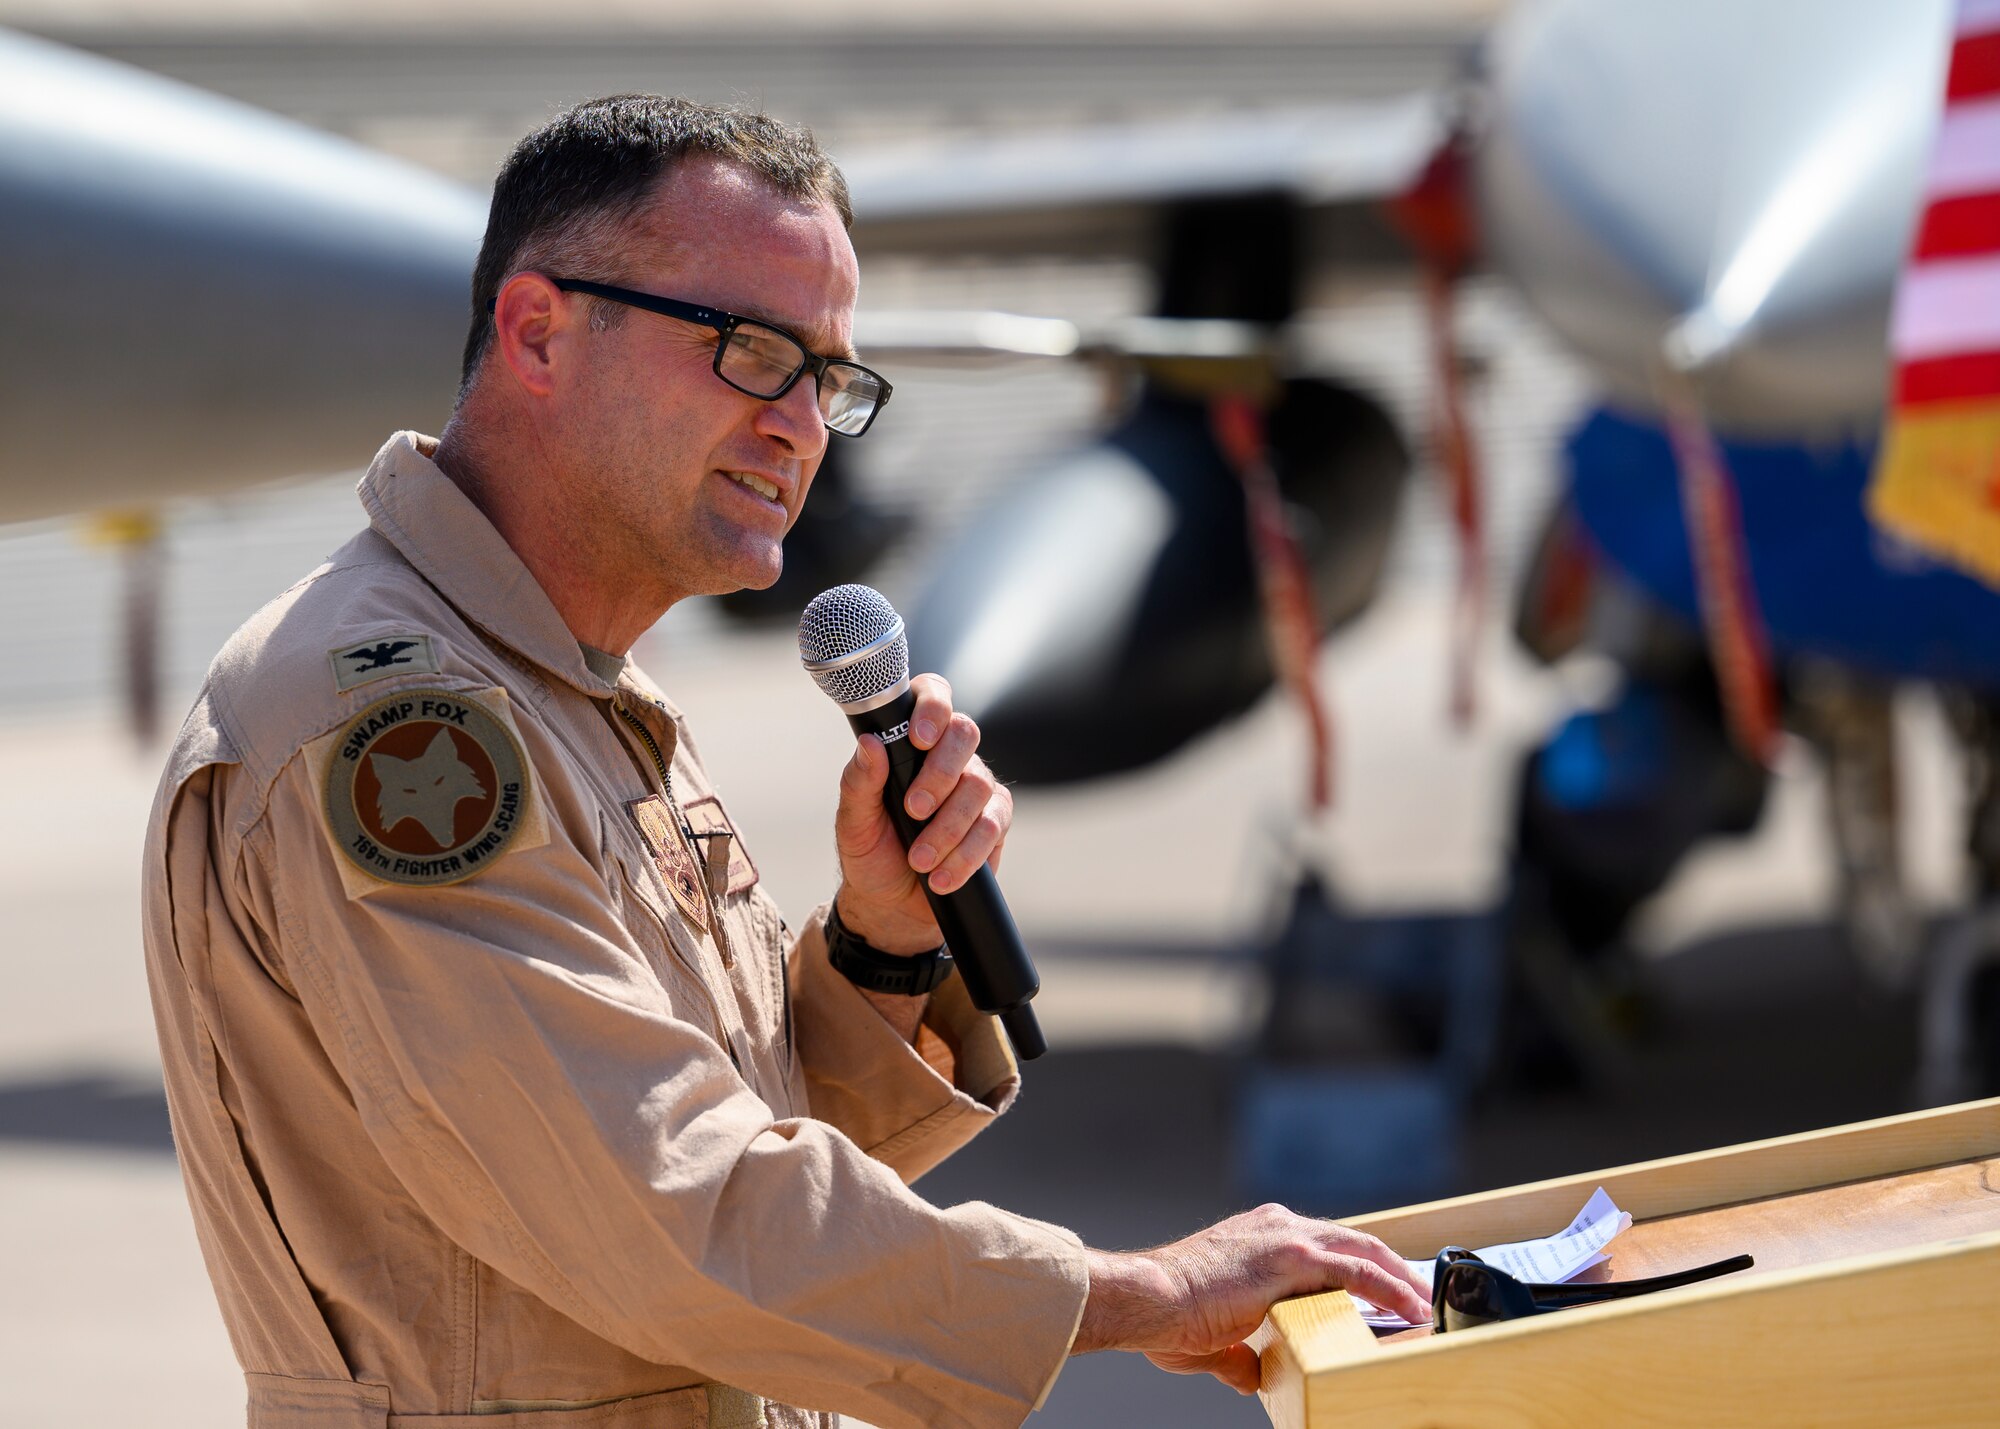 U.S. Air Force Col. Jason “Hollywood” Smith, incoming 378th Expeditionary Operations Group commander, addresses his unit for the first time during the group change of command, Prince Sultan Air Base July 5, 2021. The 378th EOG provides combat power projection in support of U.S. Central Command plans and operations. (U.S. Air Force photo by Senior Airman Samuel Earick)